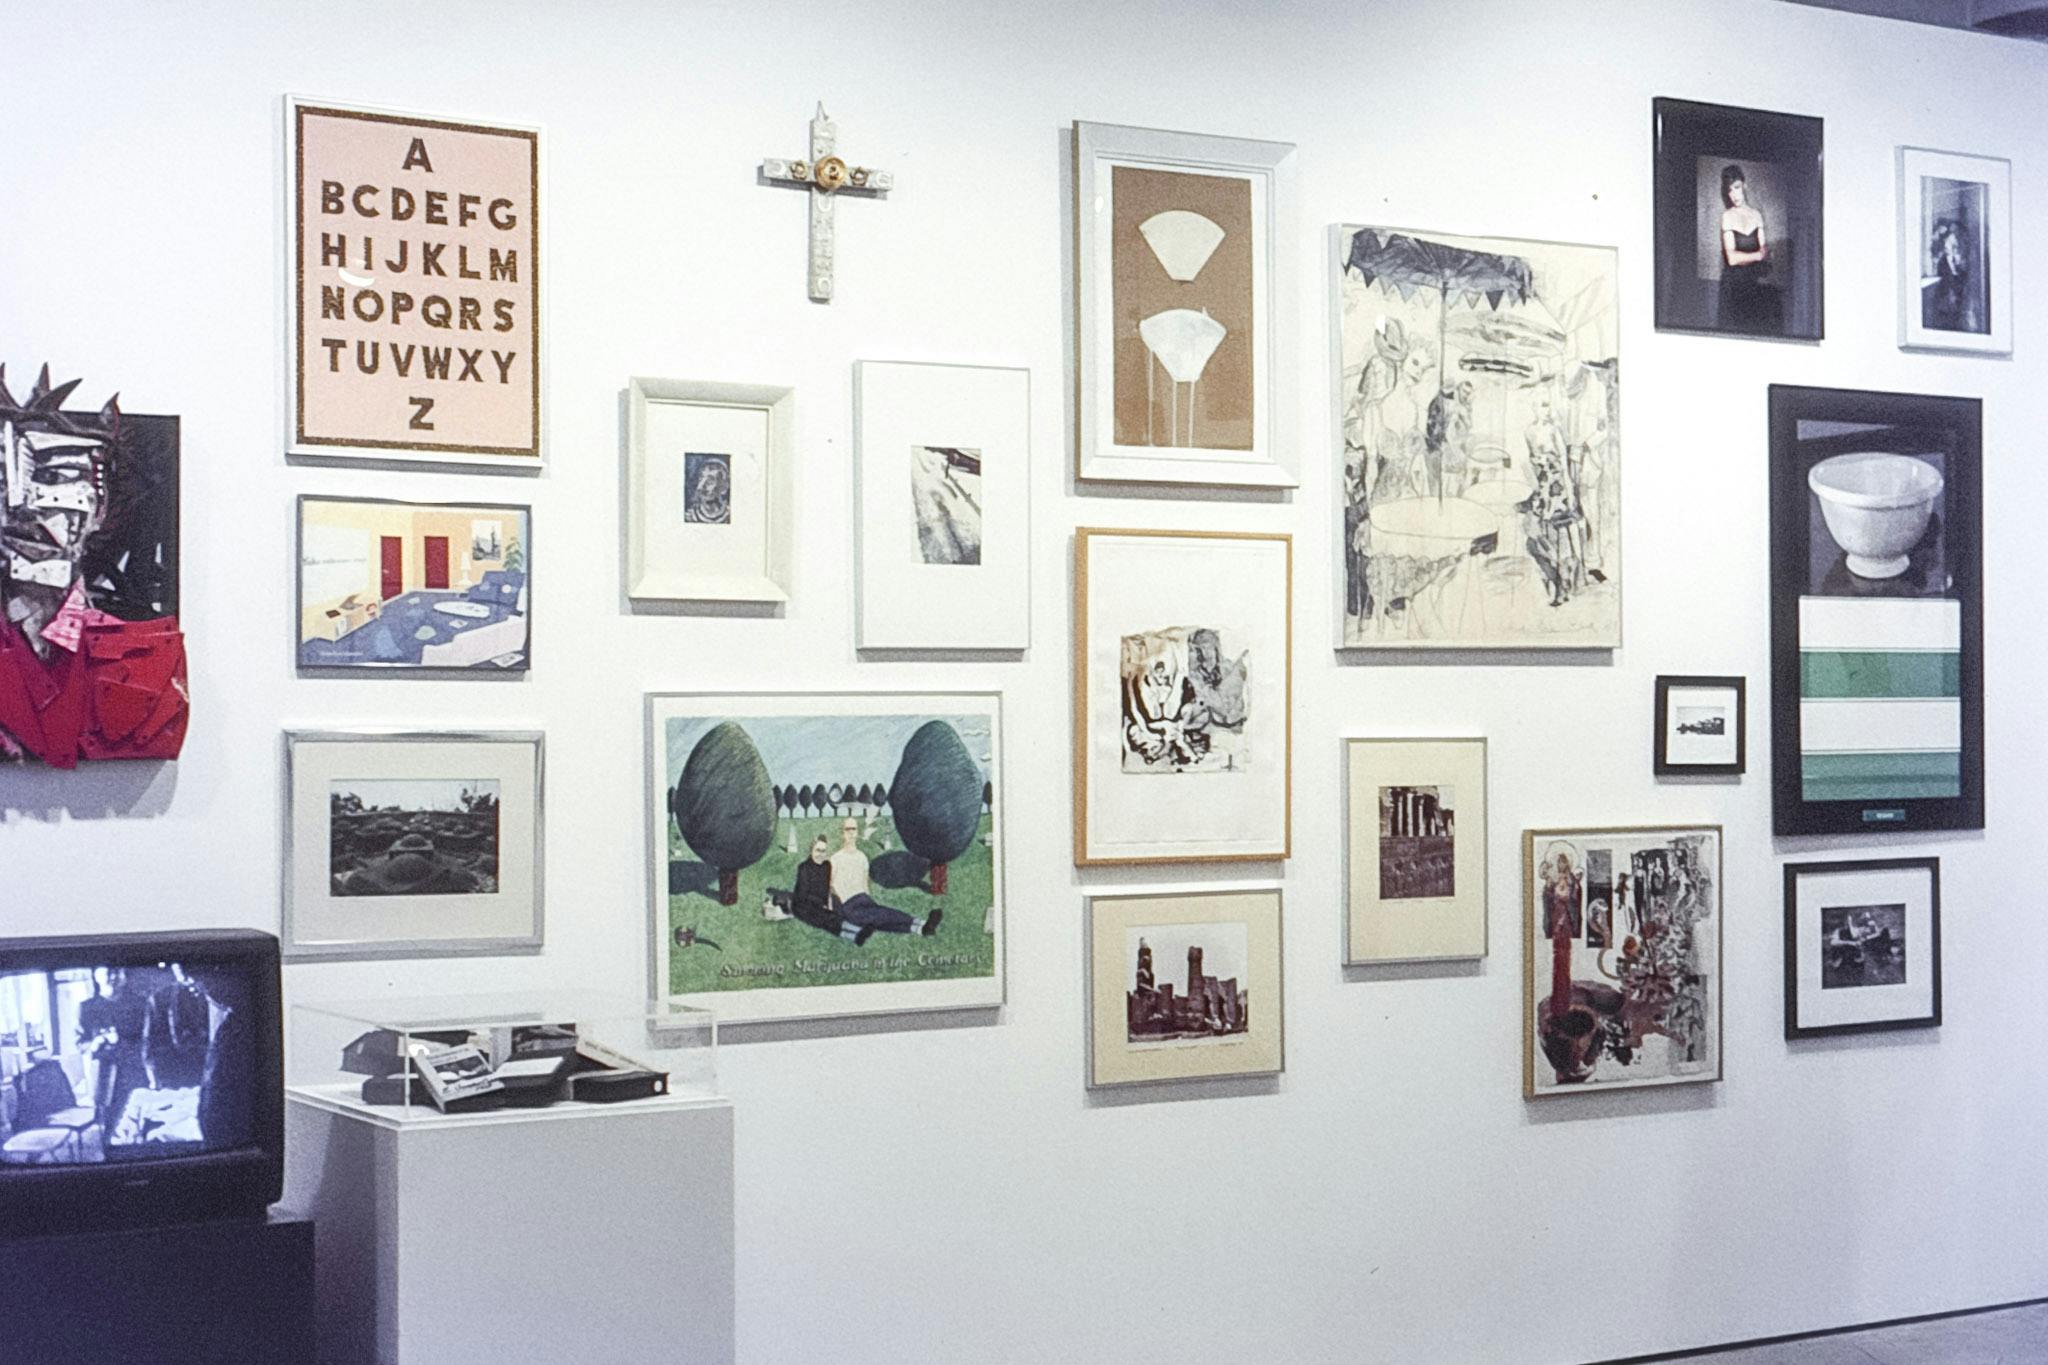 A photo of various artworks mounted on the gallery wall. A white small cross is at the top and placed beneath are paintings and photographs depicting human figures and landscapes in different styles.